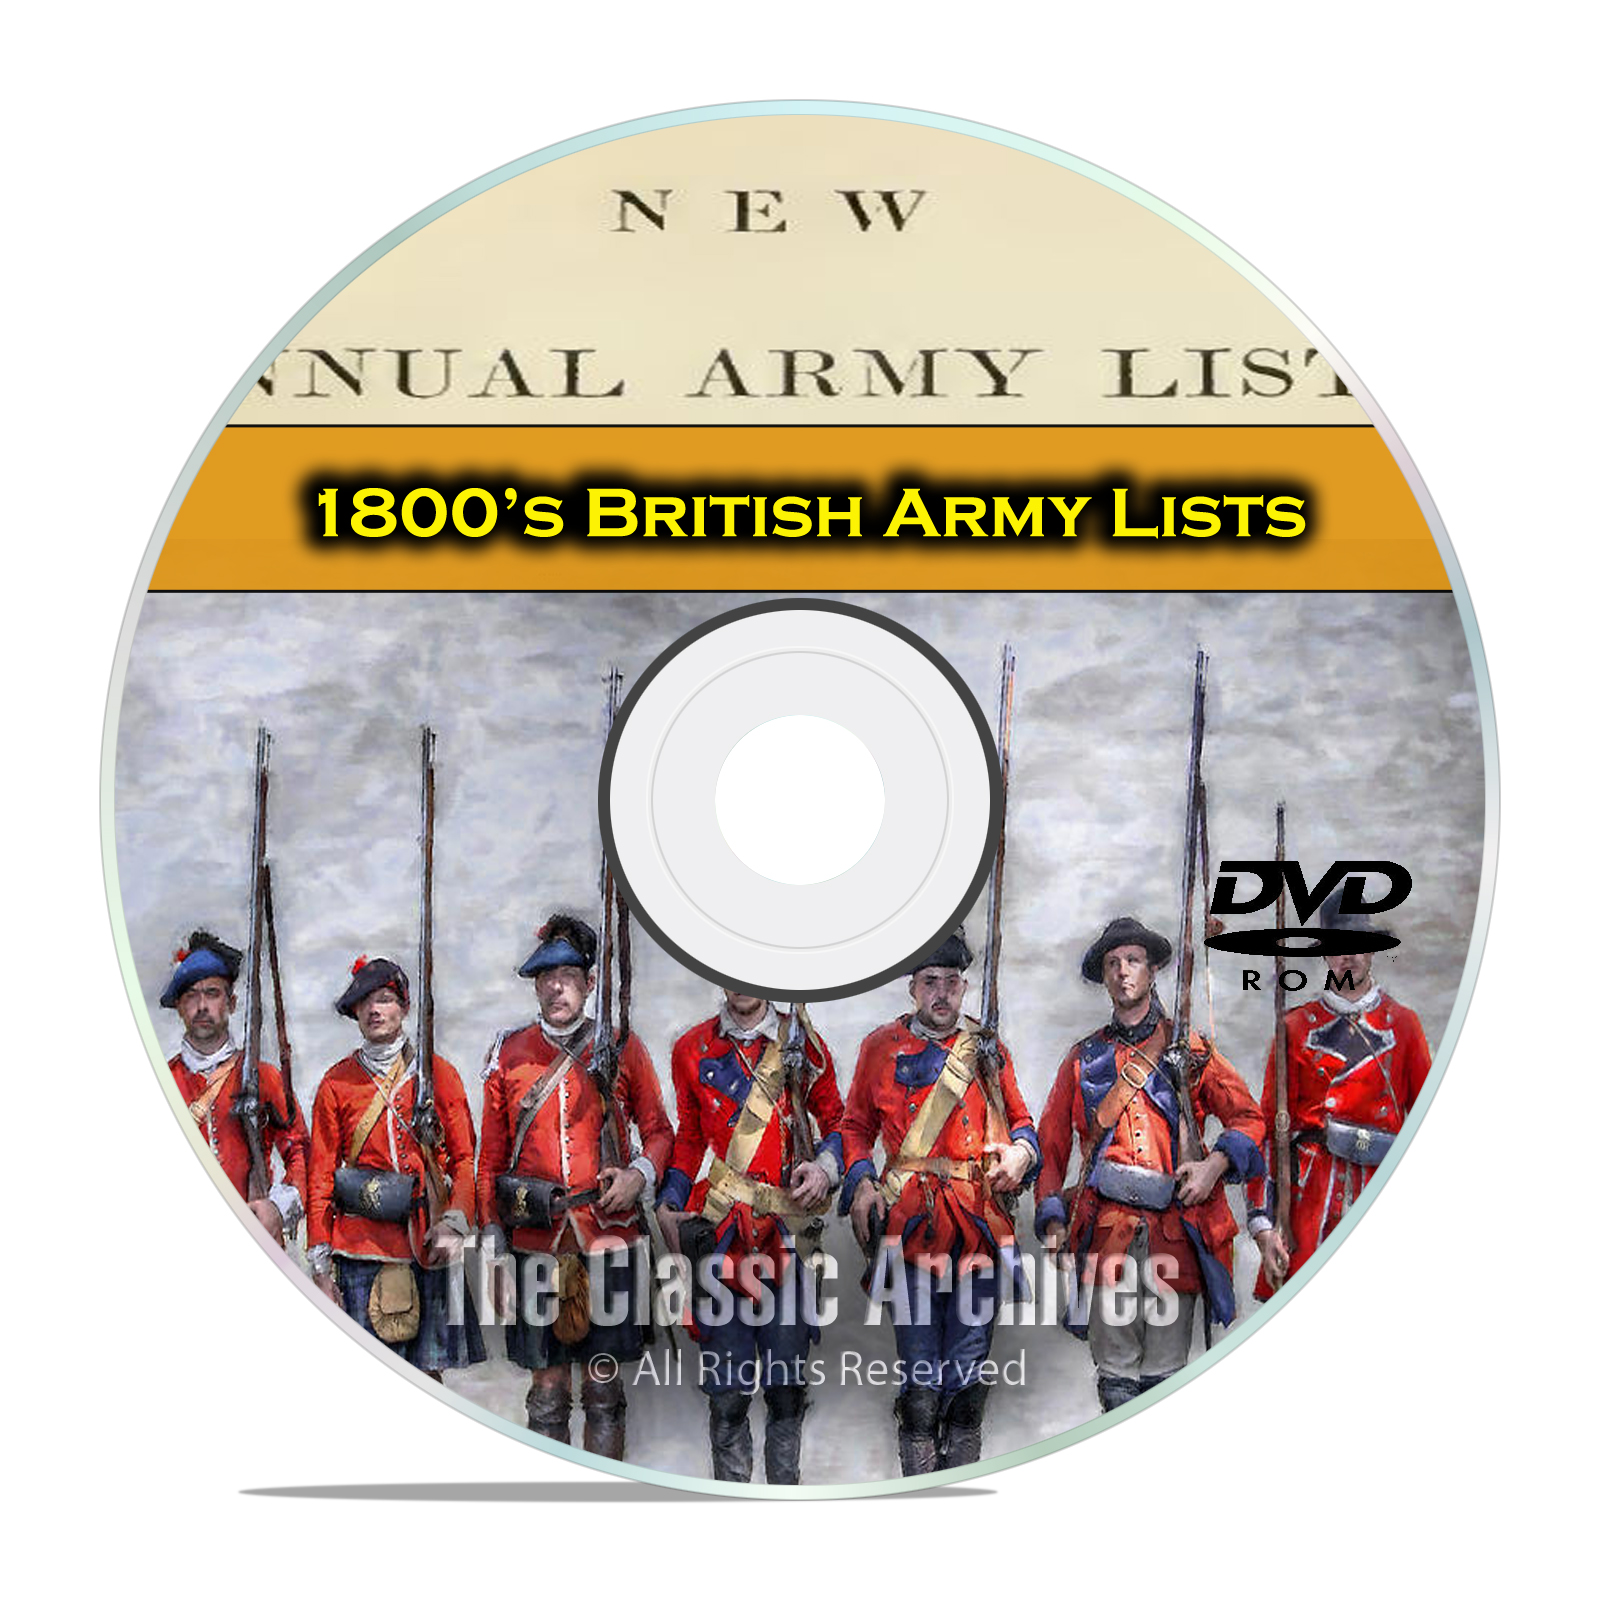 1800's British Army Lists, 1840-1899, 43 Volumes of British History PDF DVD - Click Image to Close